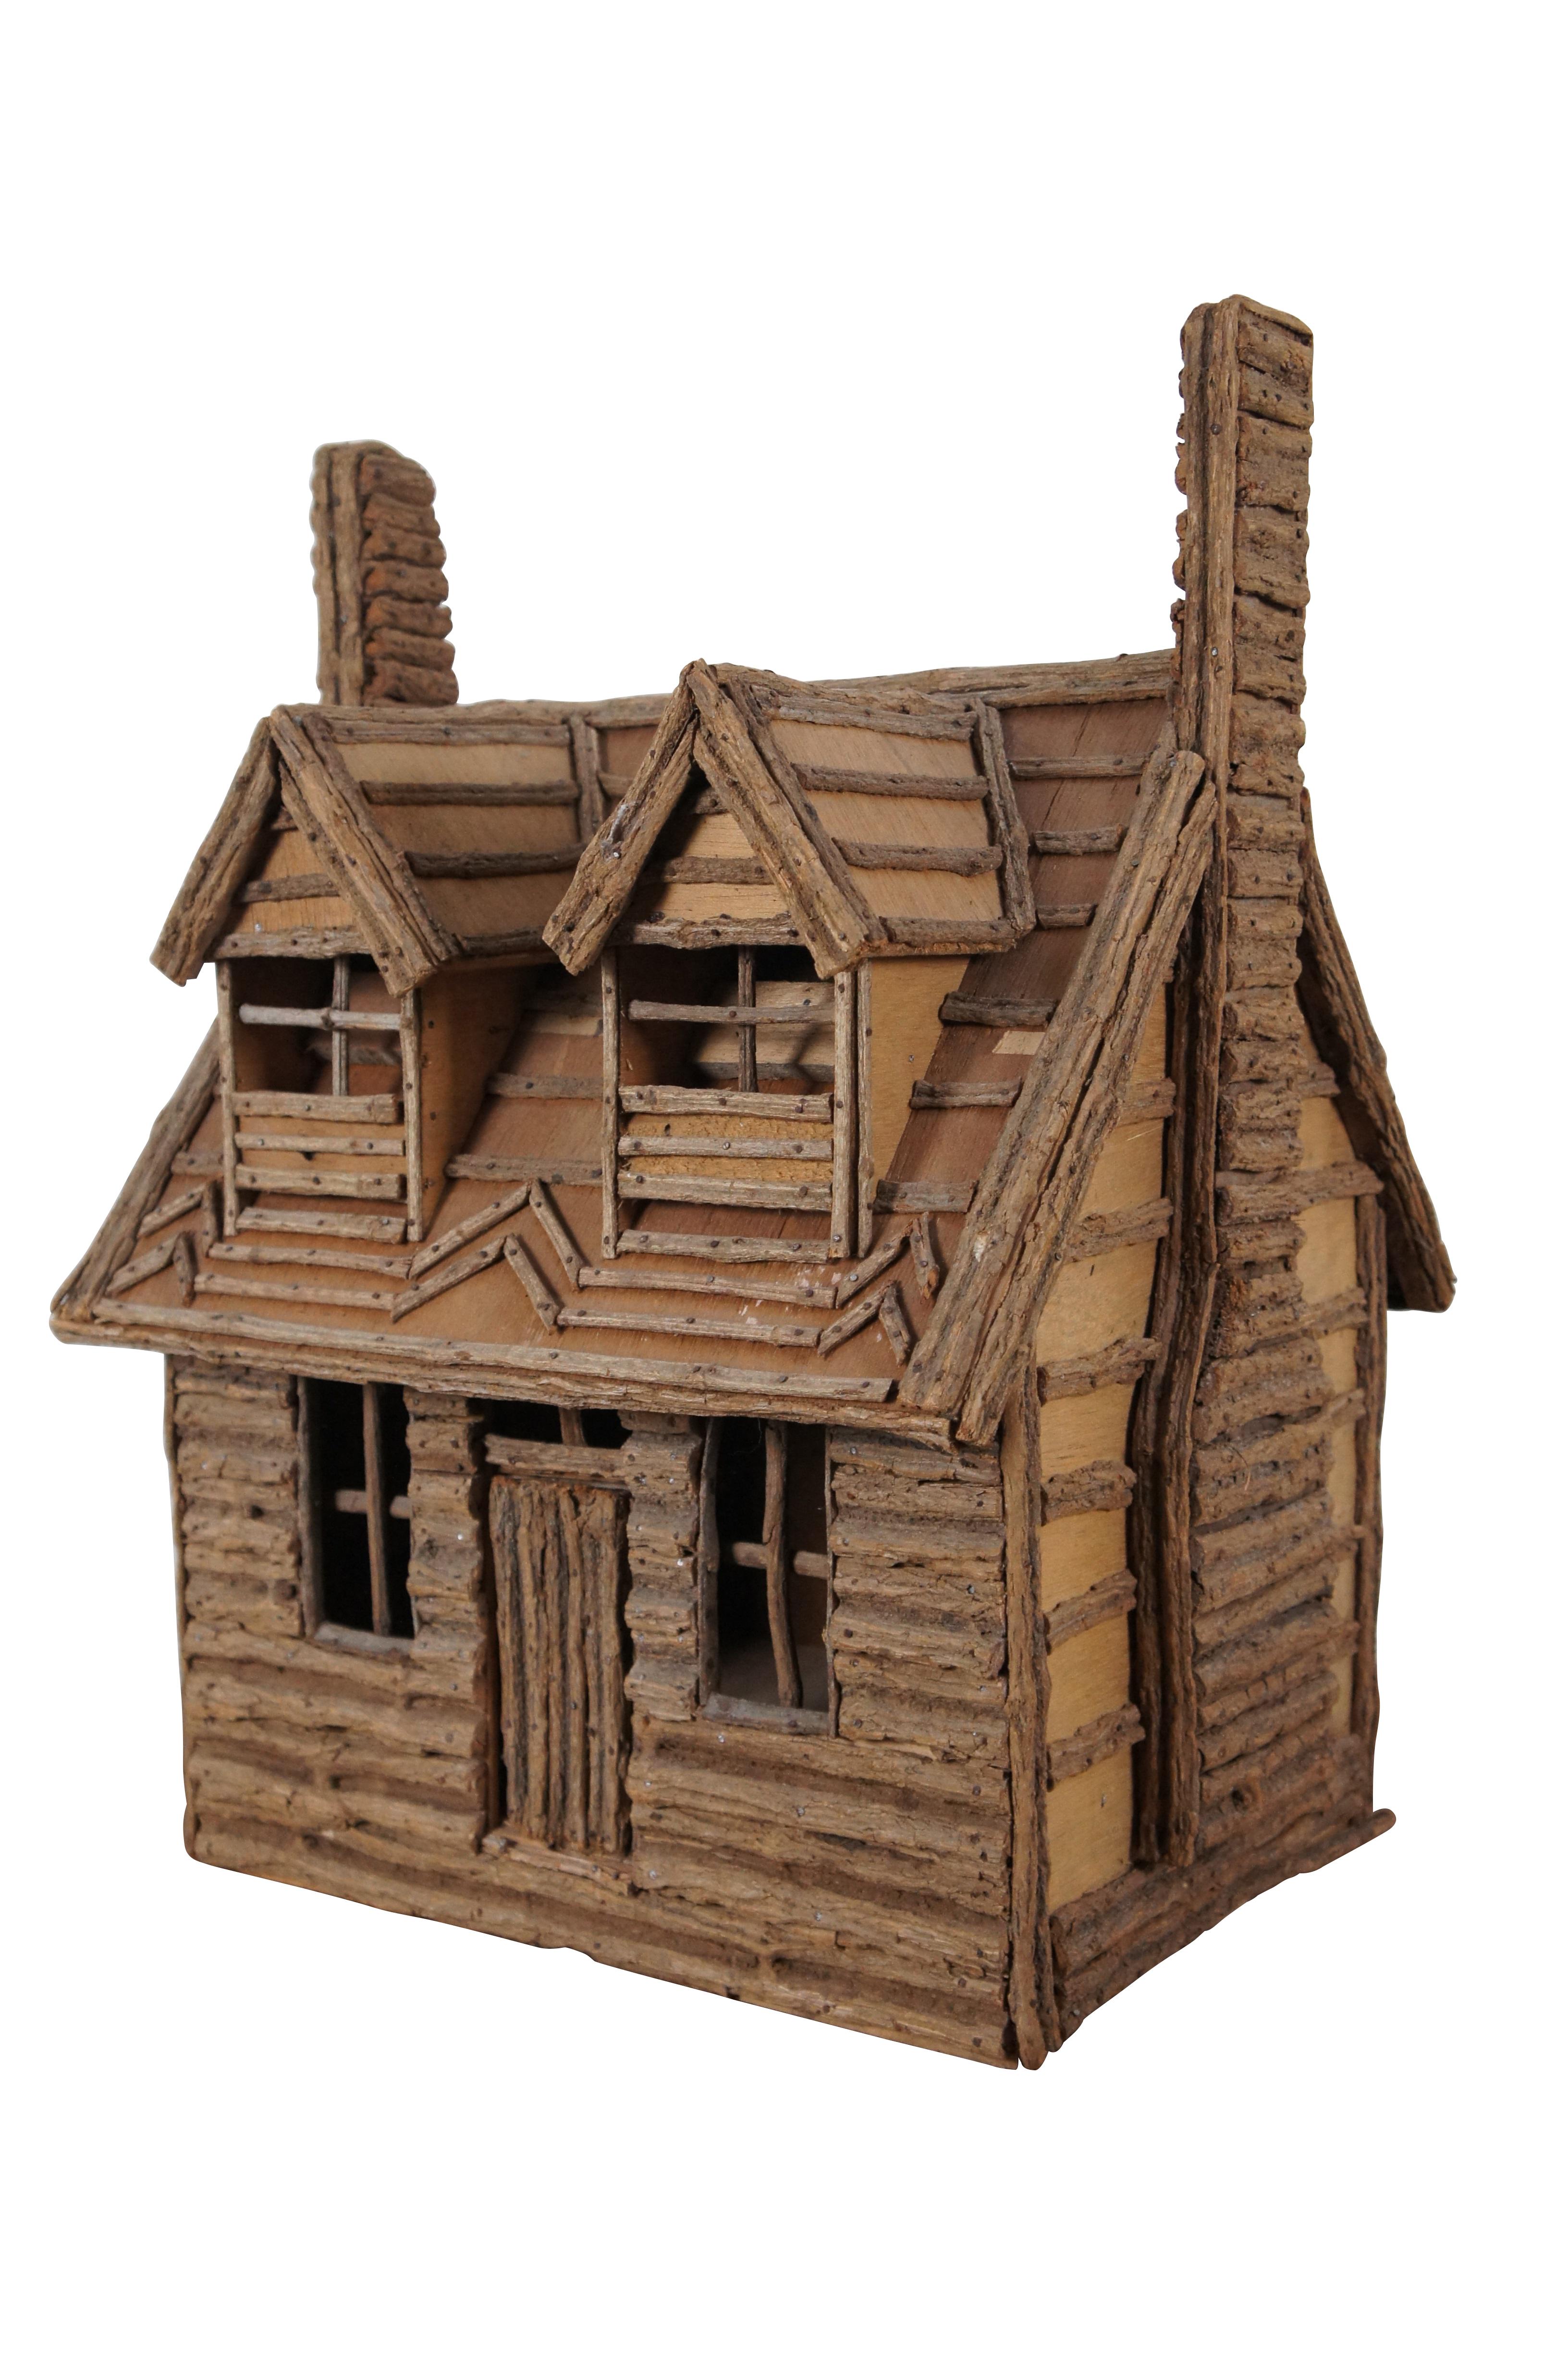 Primitive style Adirondack style log cabin.  Made from wood, sticks and bark.  Features a central door flanked by two windows.  The upper story shows two windows and two chimneys.

Dimensions:
17.25” x 15.75” x 23” (Width x Depth x Height)